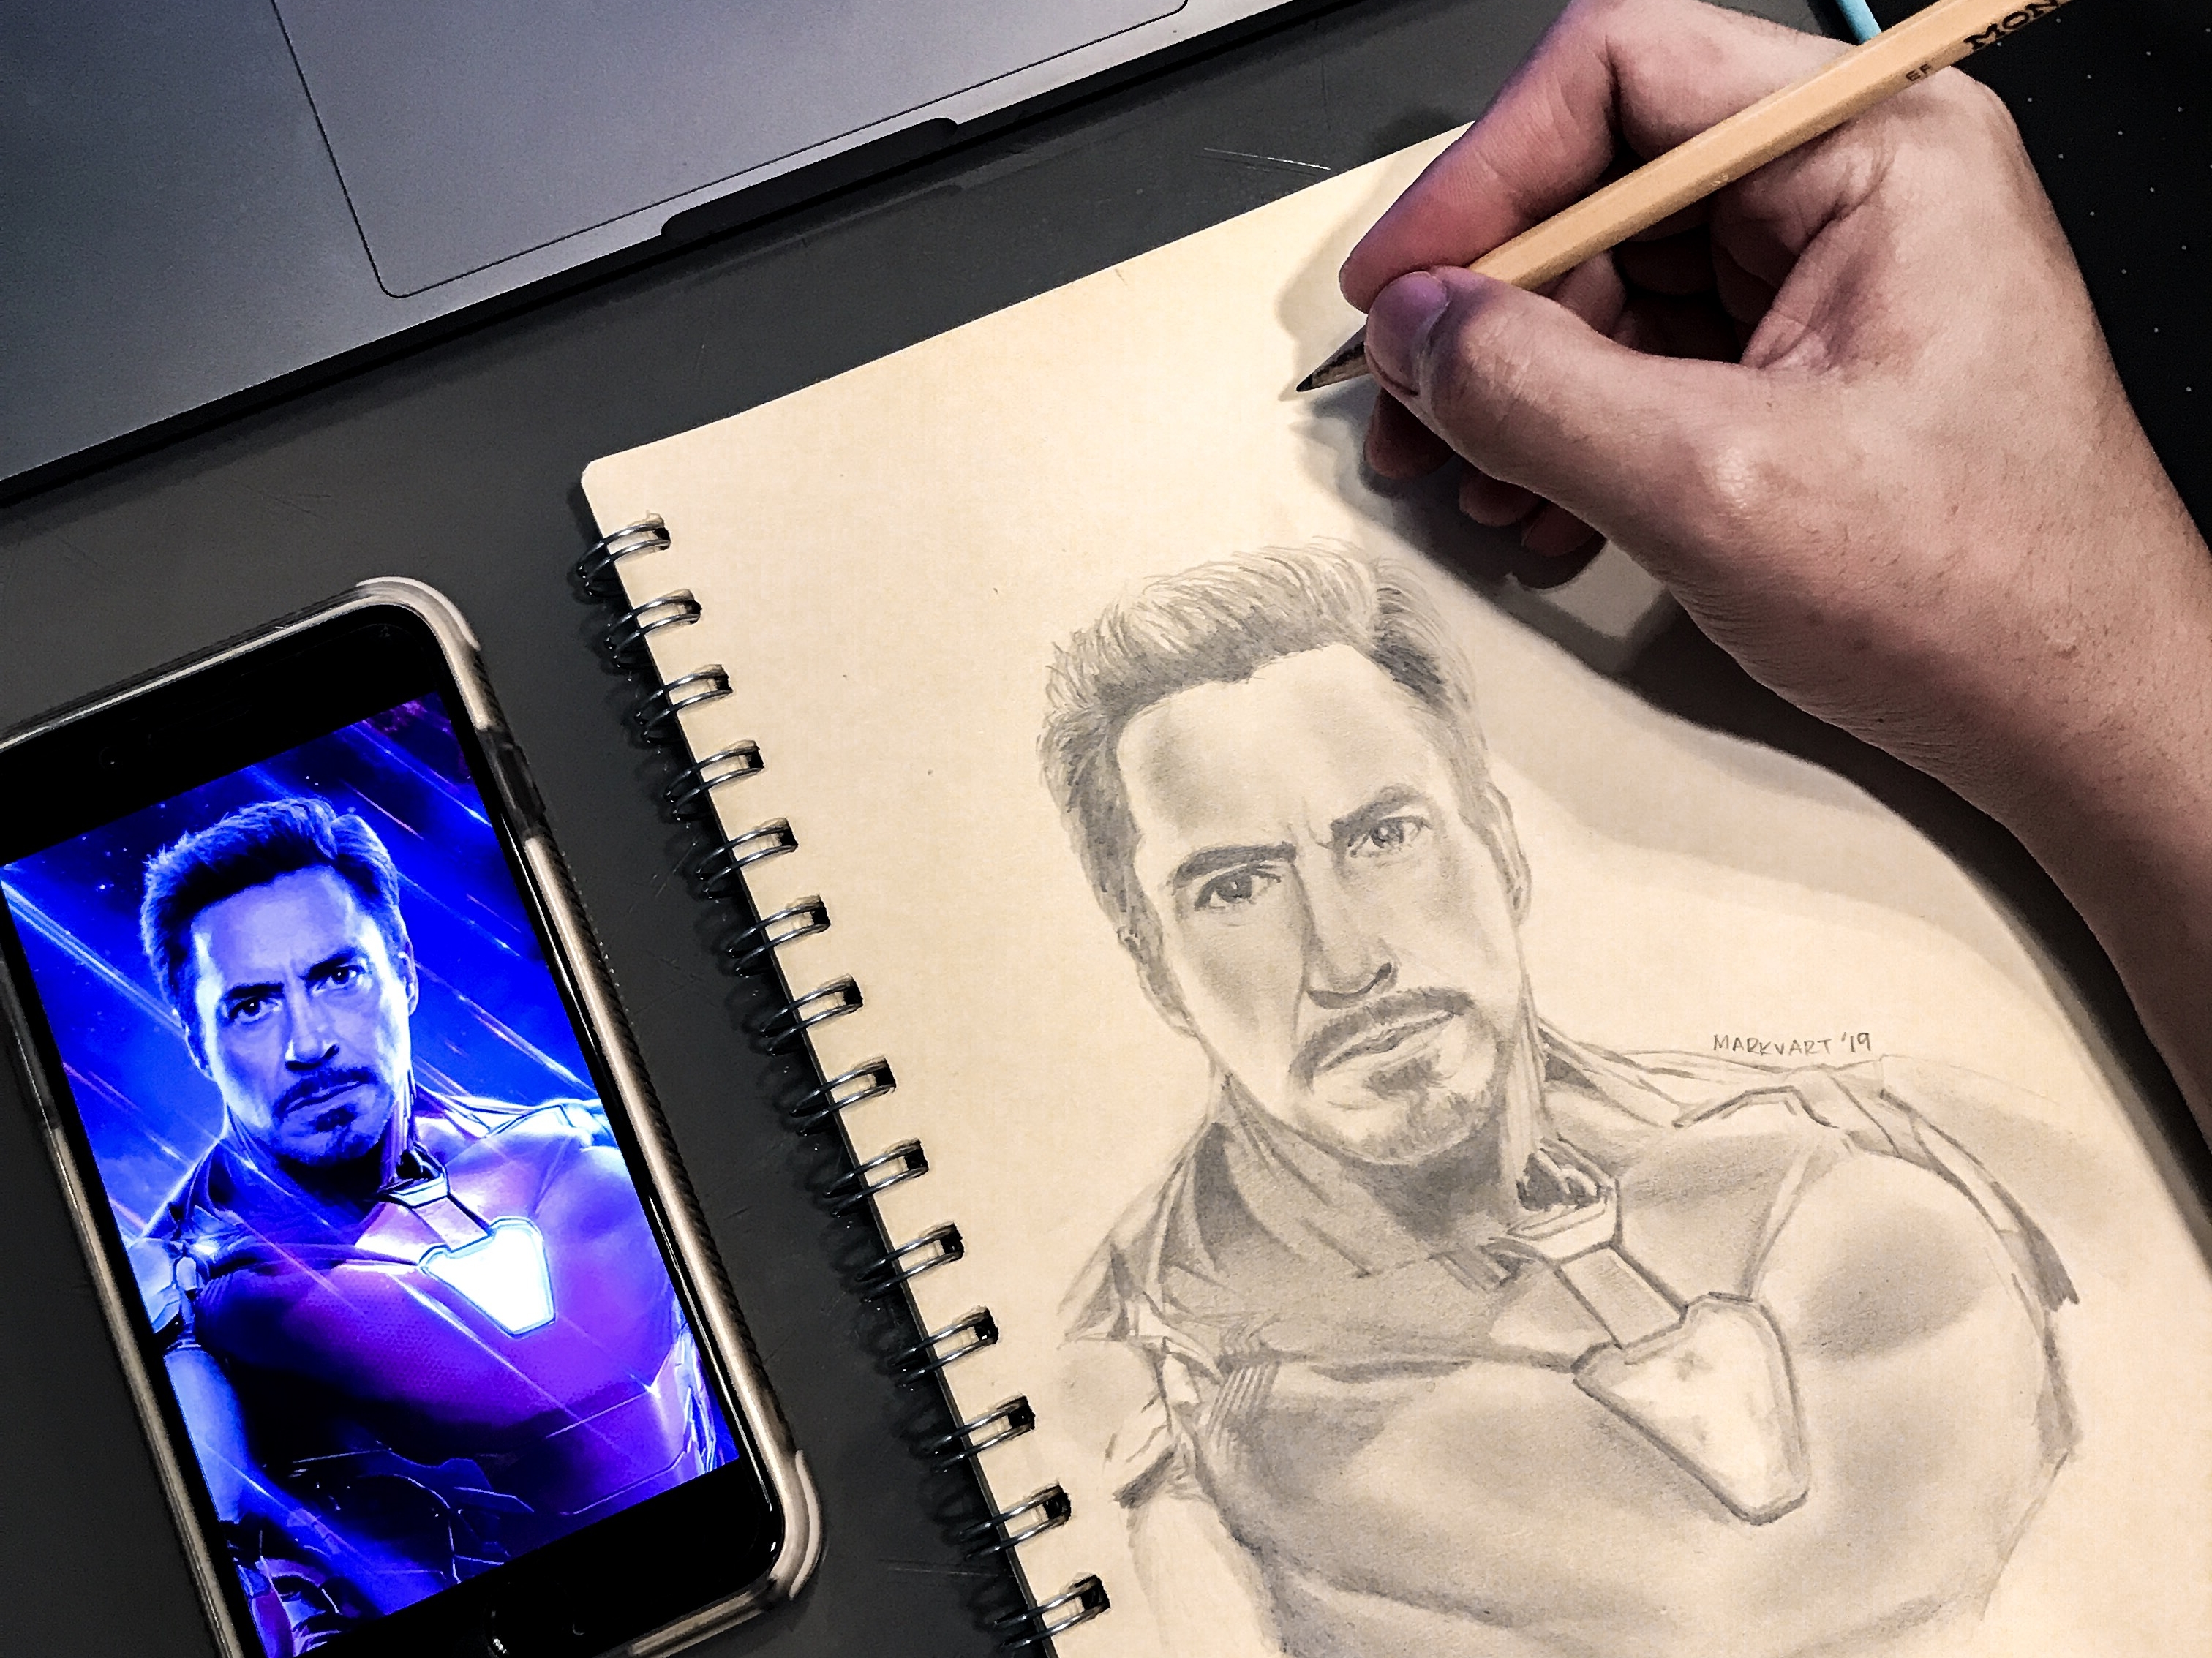 Shrees Art  Attempt to draw colour pencil sketch of Tony Stark  Iron man   Need to improve resemblance Focused on shading with colour pencils  this time Any feedback on shading